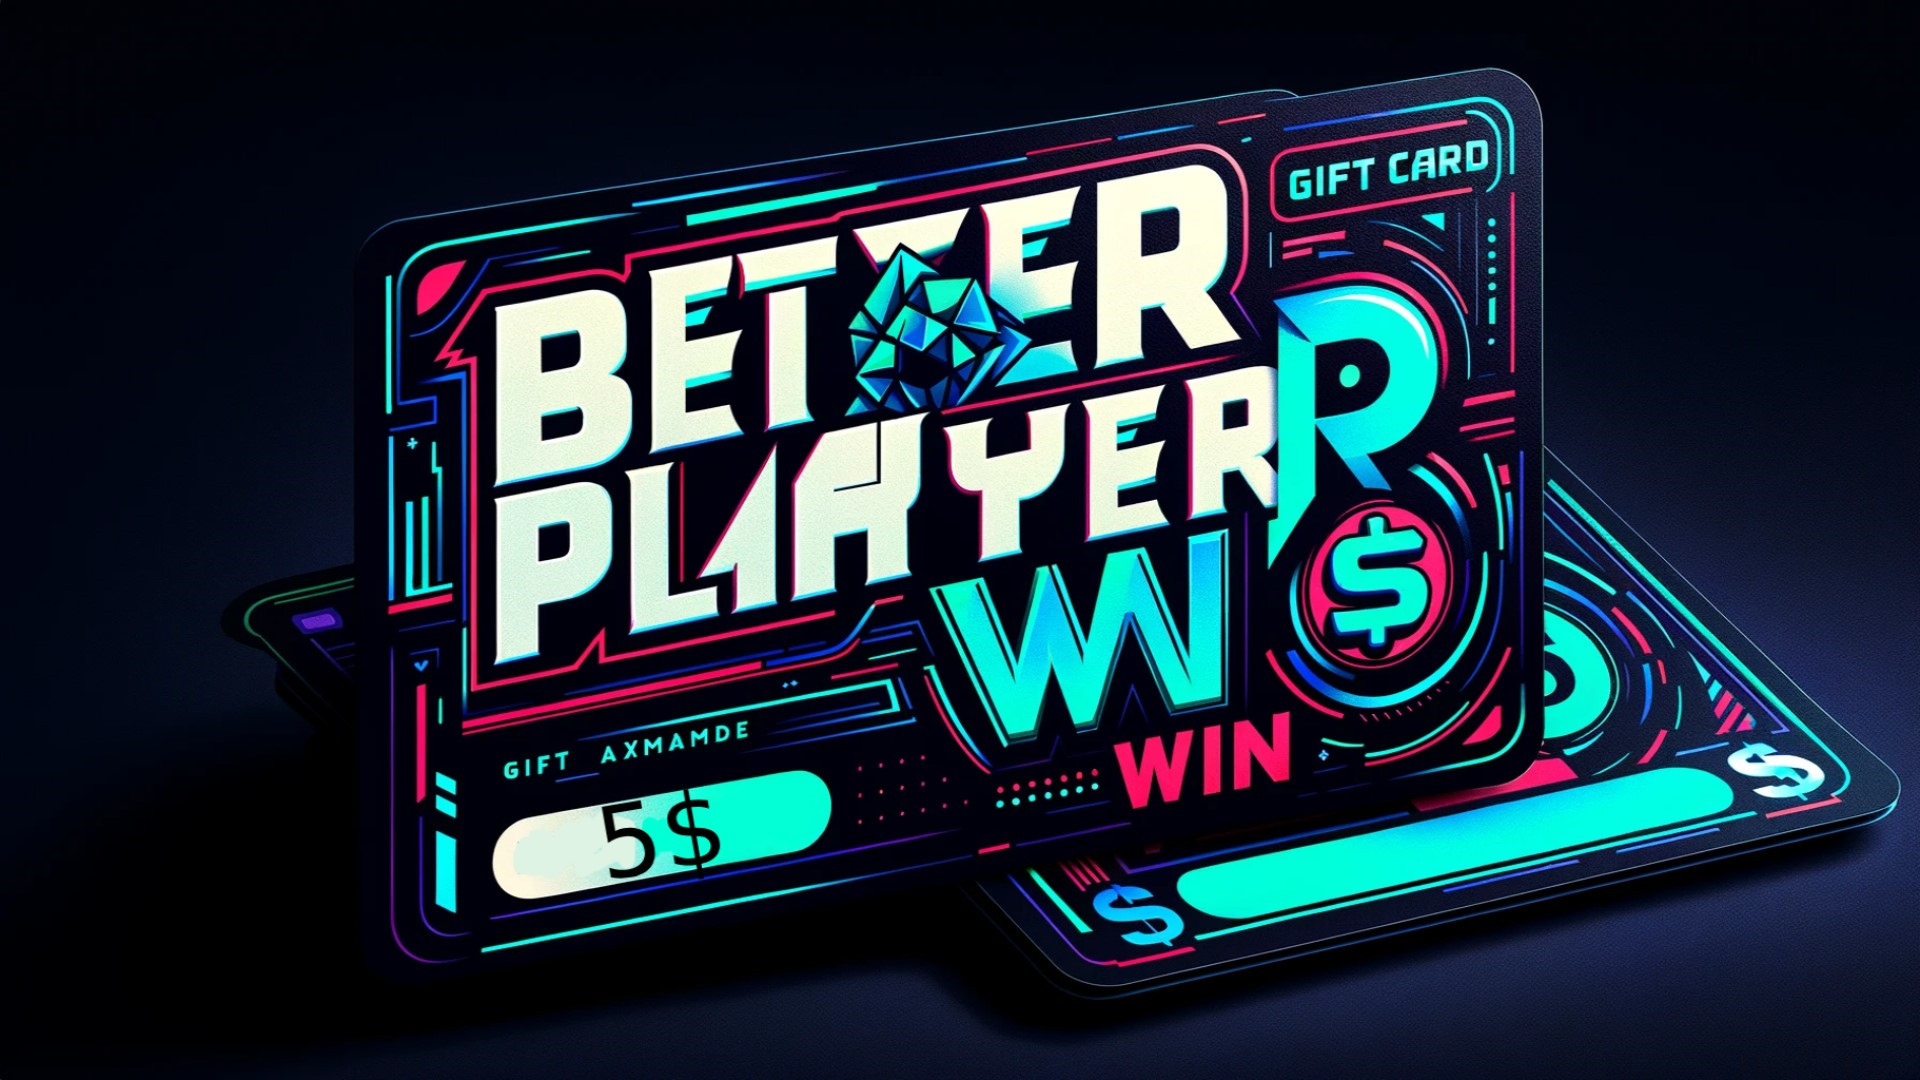 BetterPlayerWin 5 Coins Gift Card 6.19 usd